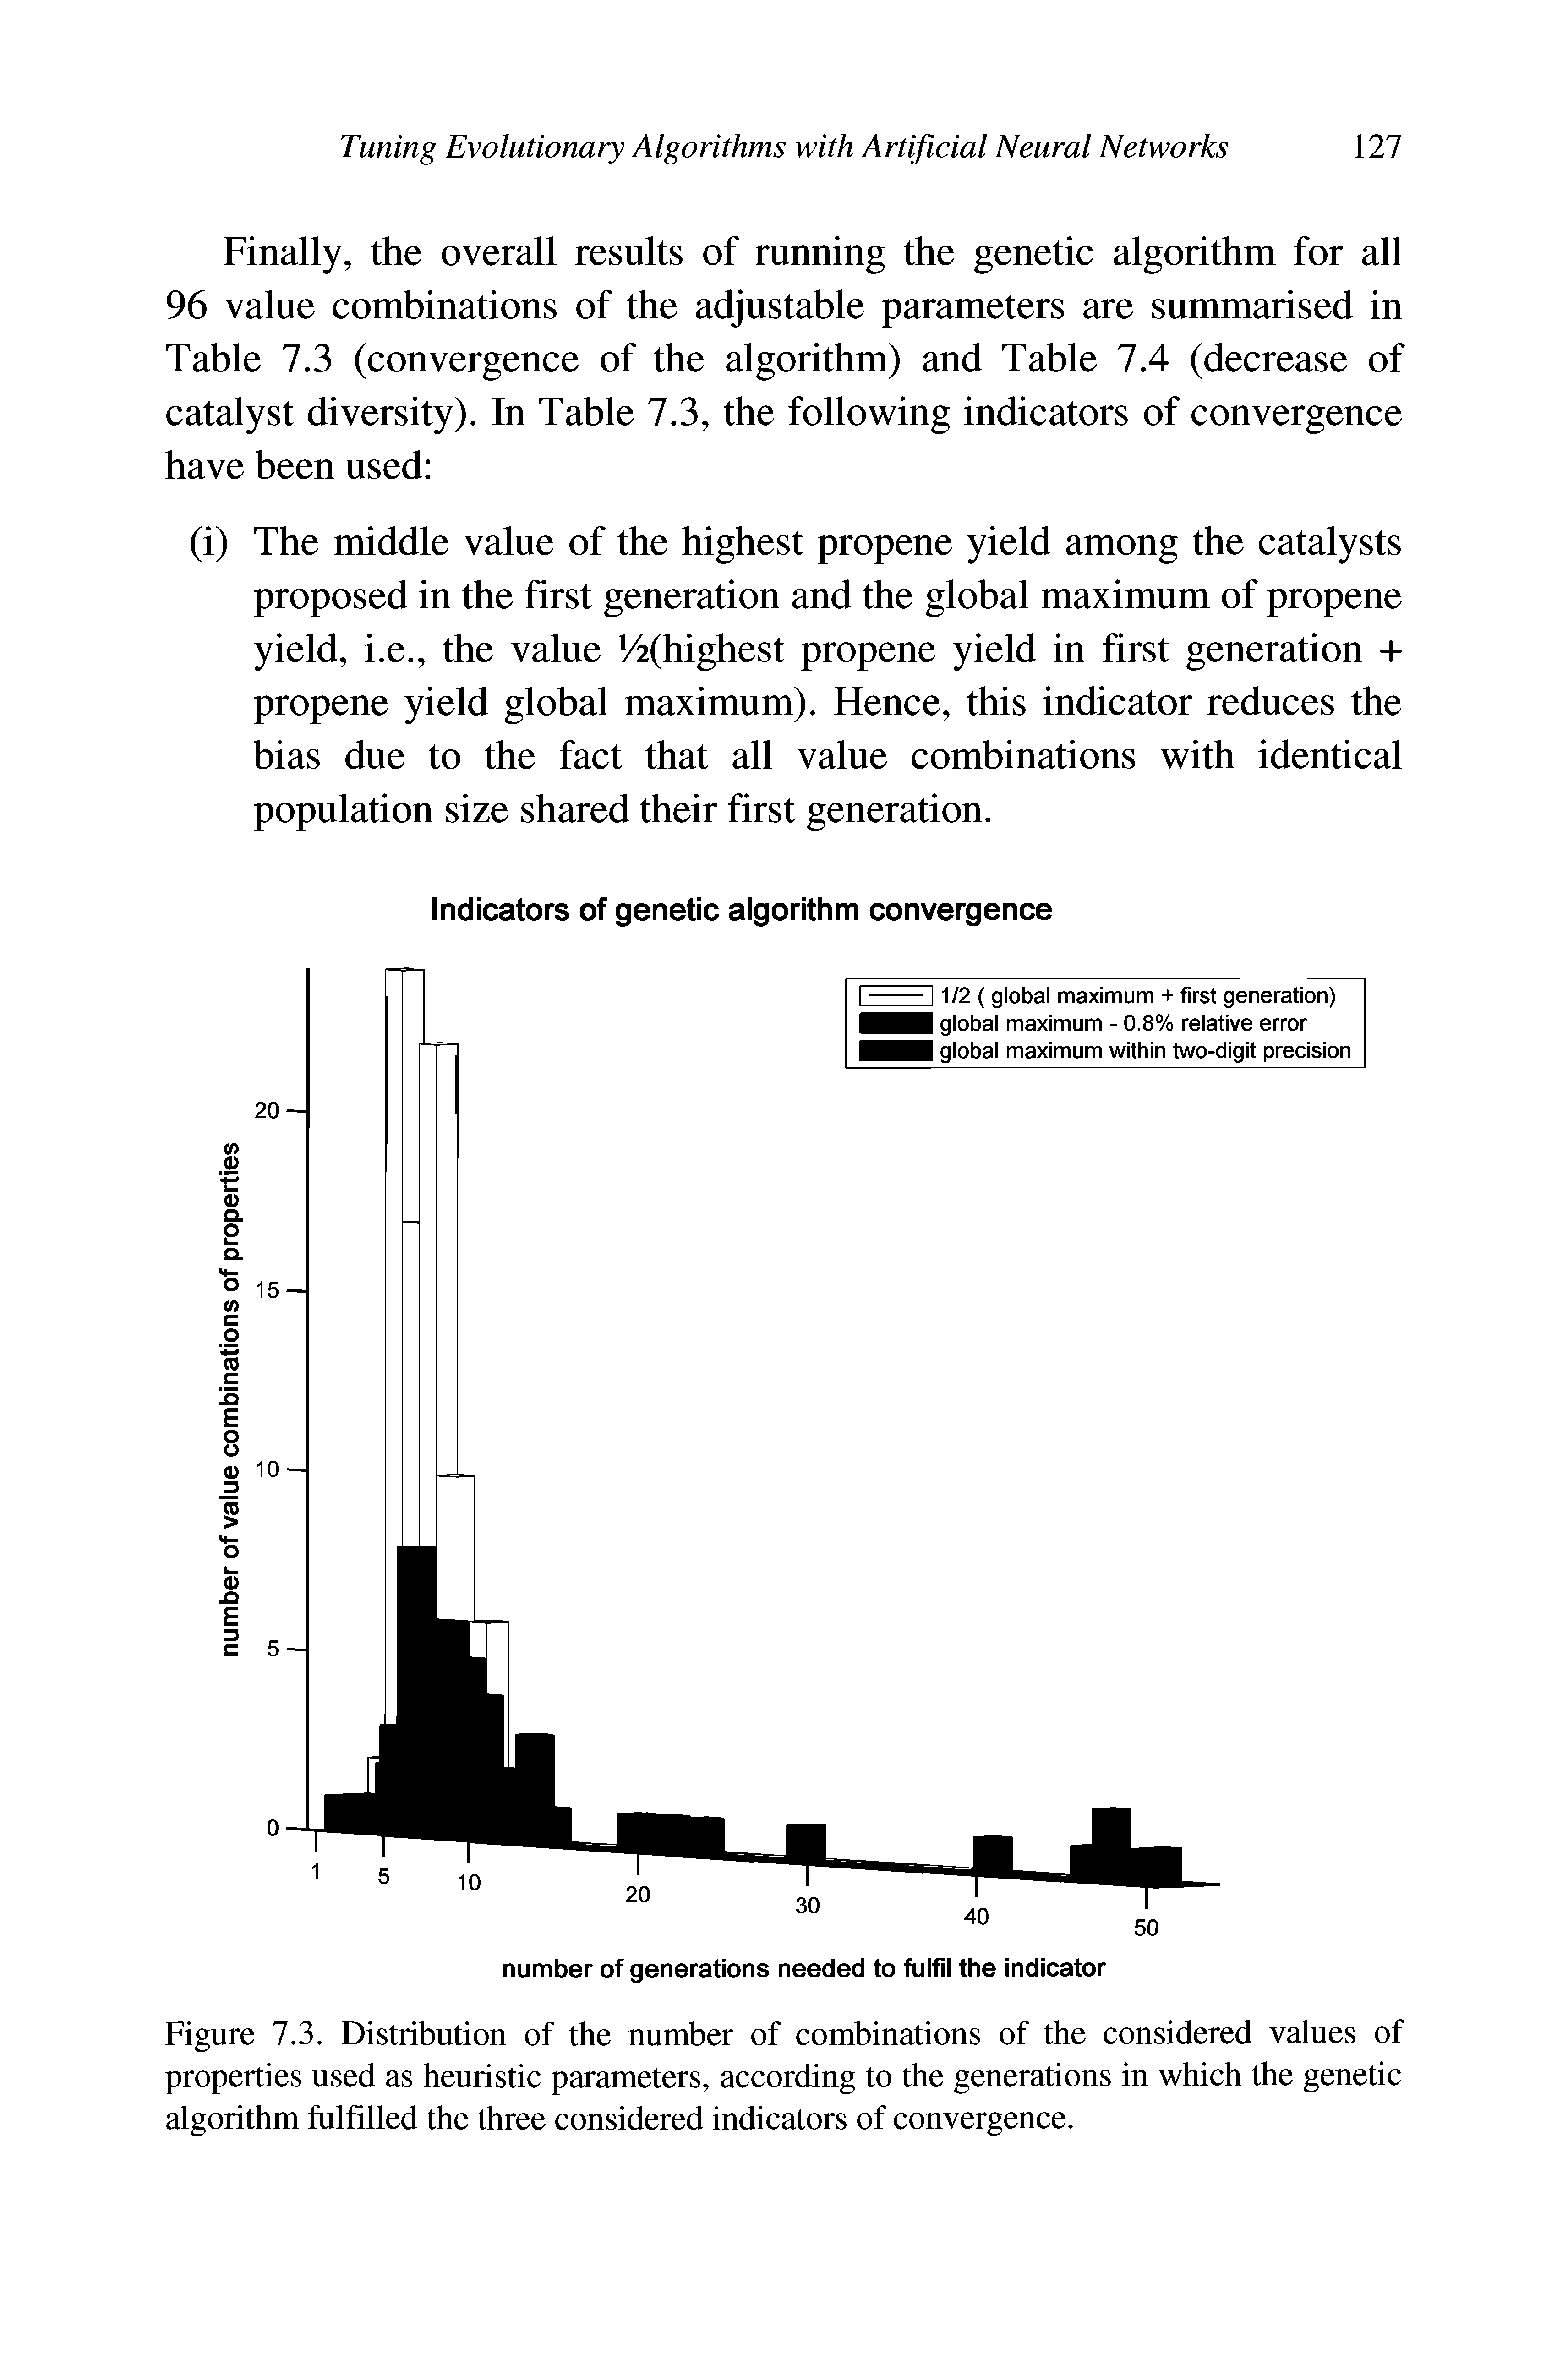 Figure 7.3. Distribution of the number of combinations of the considered values of properties used as heuristic parameters, according to the generations in which the genetic algorithm fulfilled the three considered indicators of convergence.